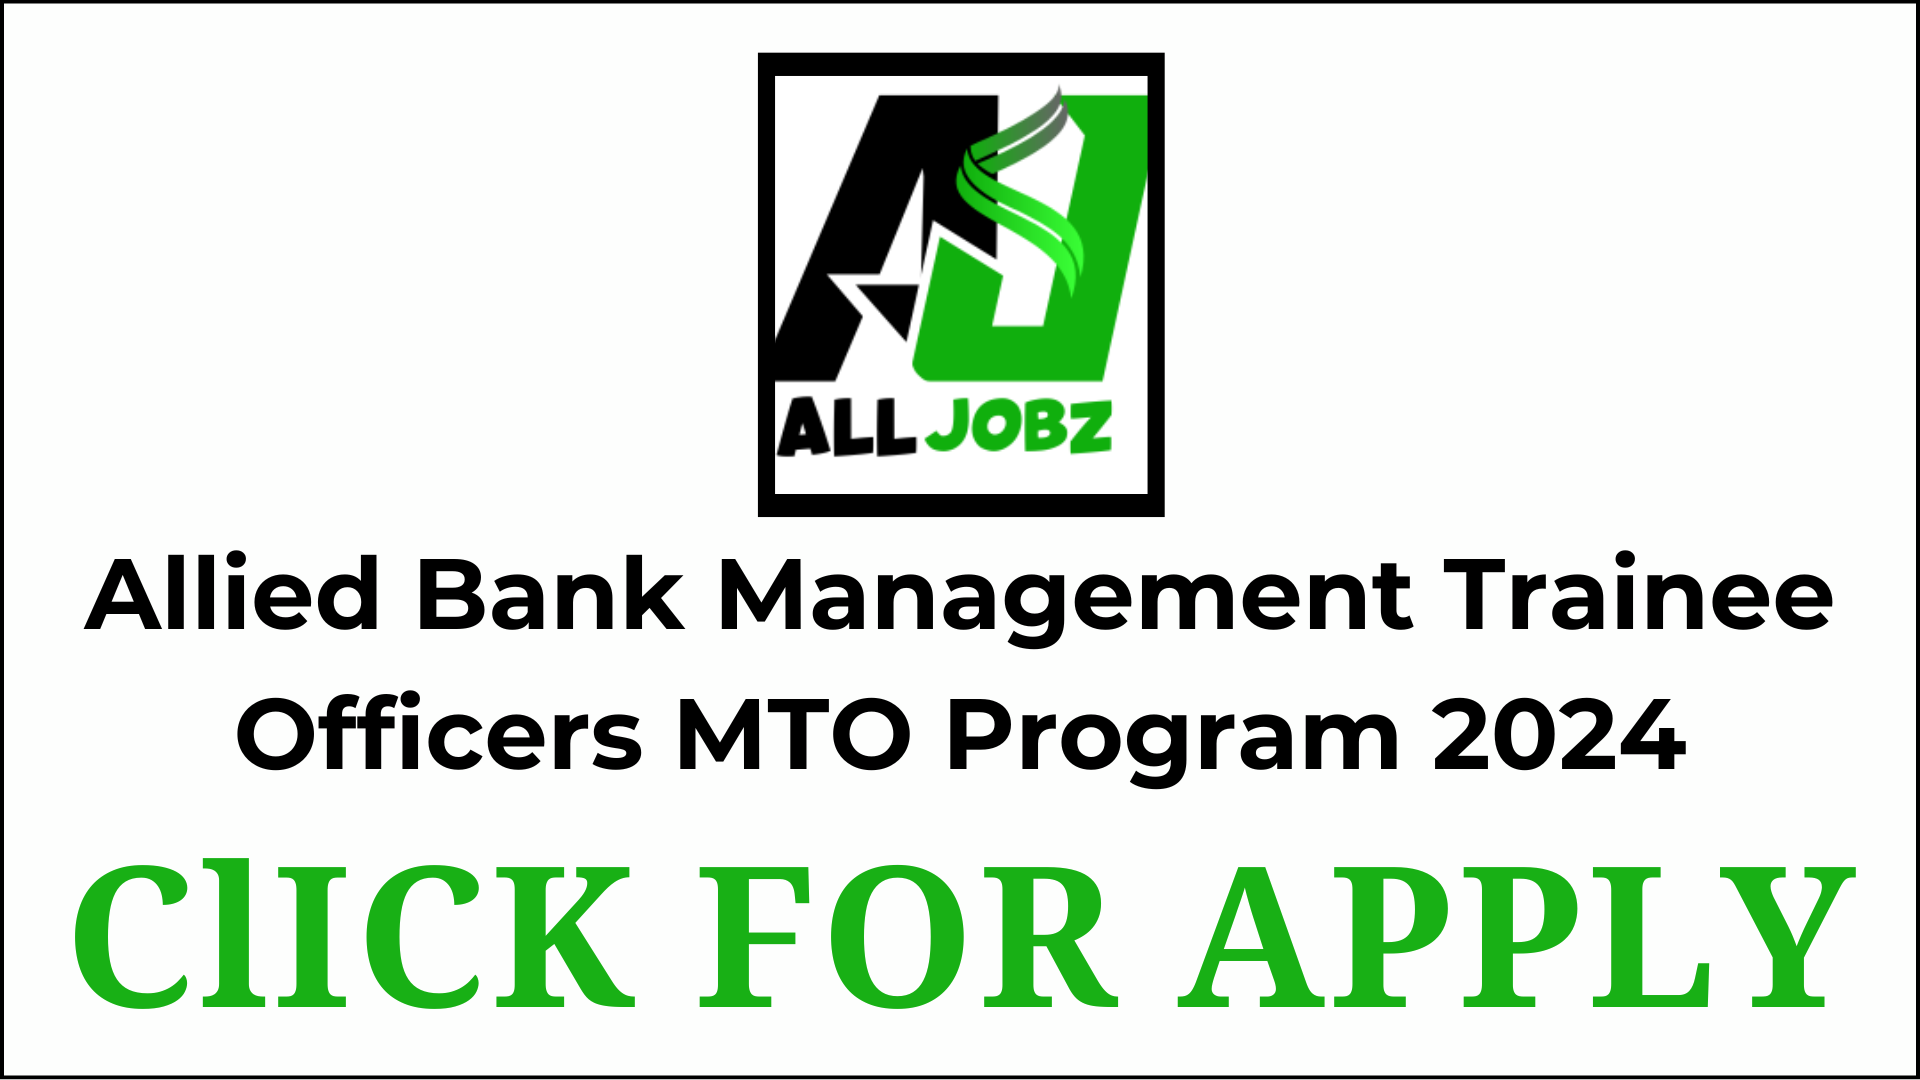 Allied Bank Management Trainee Officers Mto Program, Allied Bank Management Trainee Officers Mto Program 2024, Allied Bank Management Trainee Officers Mto Program Salary, Allied Bank Management Trainee Officers Mto Program Online, Allied Bank Management Trainee Officers Mto Program Apply, Allied Bank Teller Jobs, Allied Bank Mto Job Description, Allied Bank Jobs For Freshers, Www Abl Com Careers Online Apply, Allied Bank Jobs 2024,